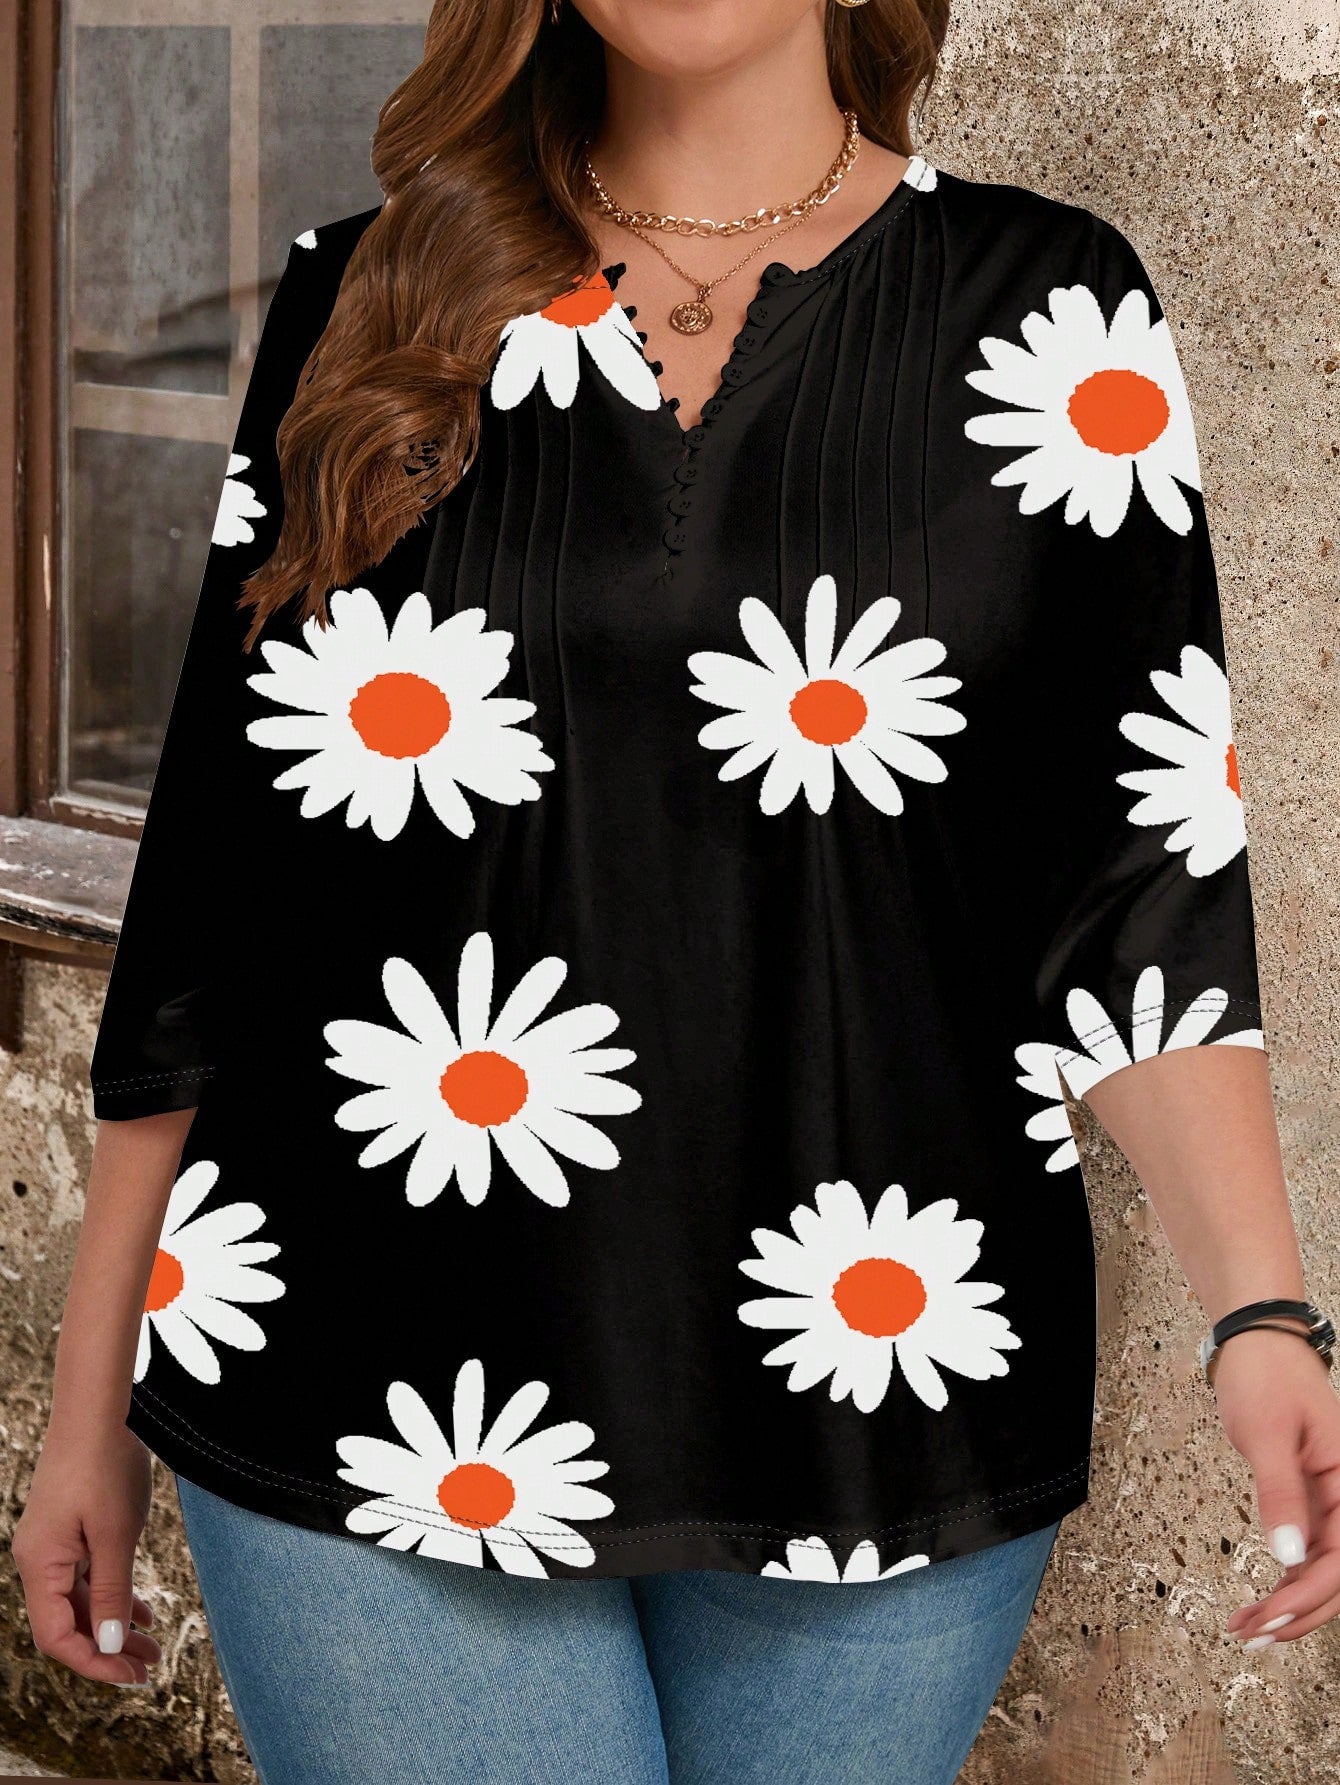 Casual Plus Size Daisy Printed Women's White T-Shirt For Summer